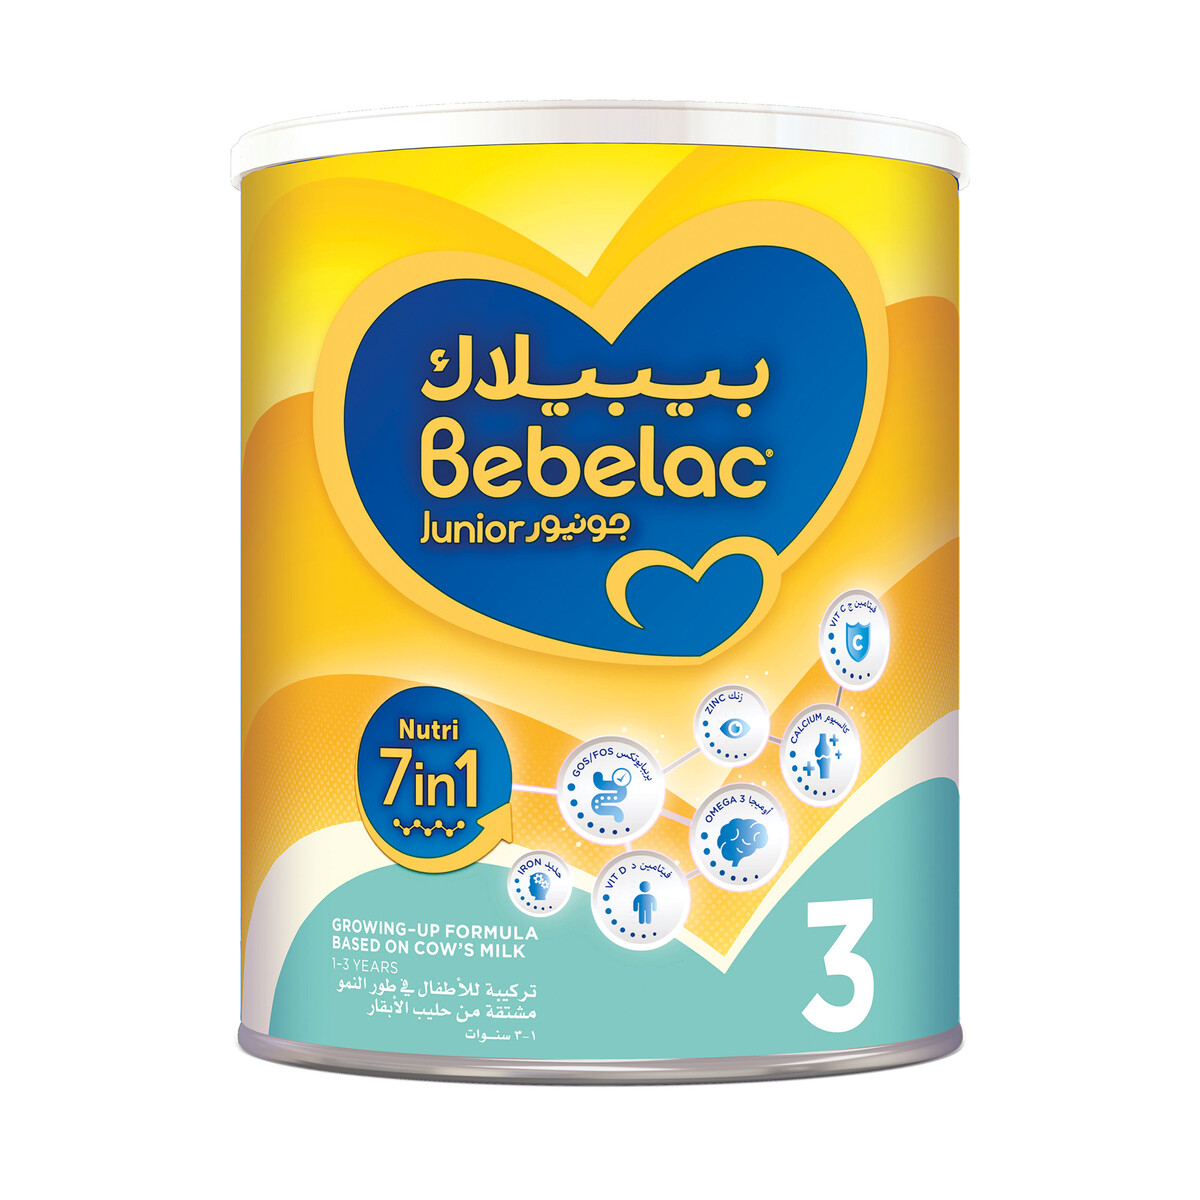 Bebelac Junior Nutri 7in1 Growing Up Formula Stage 3 From 1 to 3 Years 400g